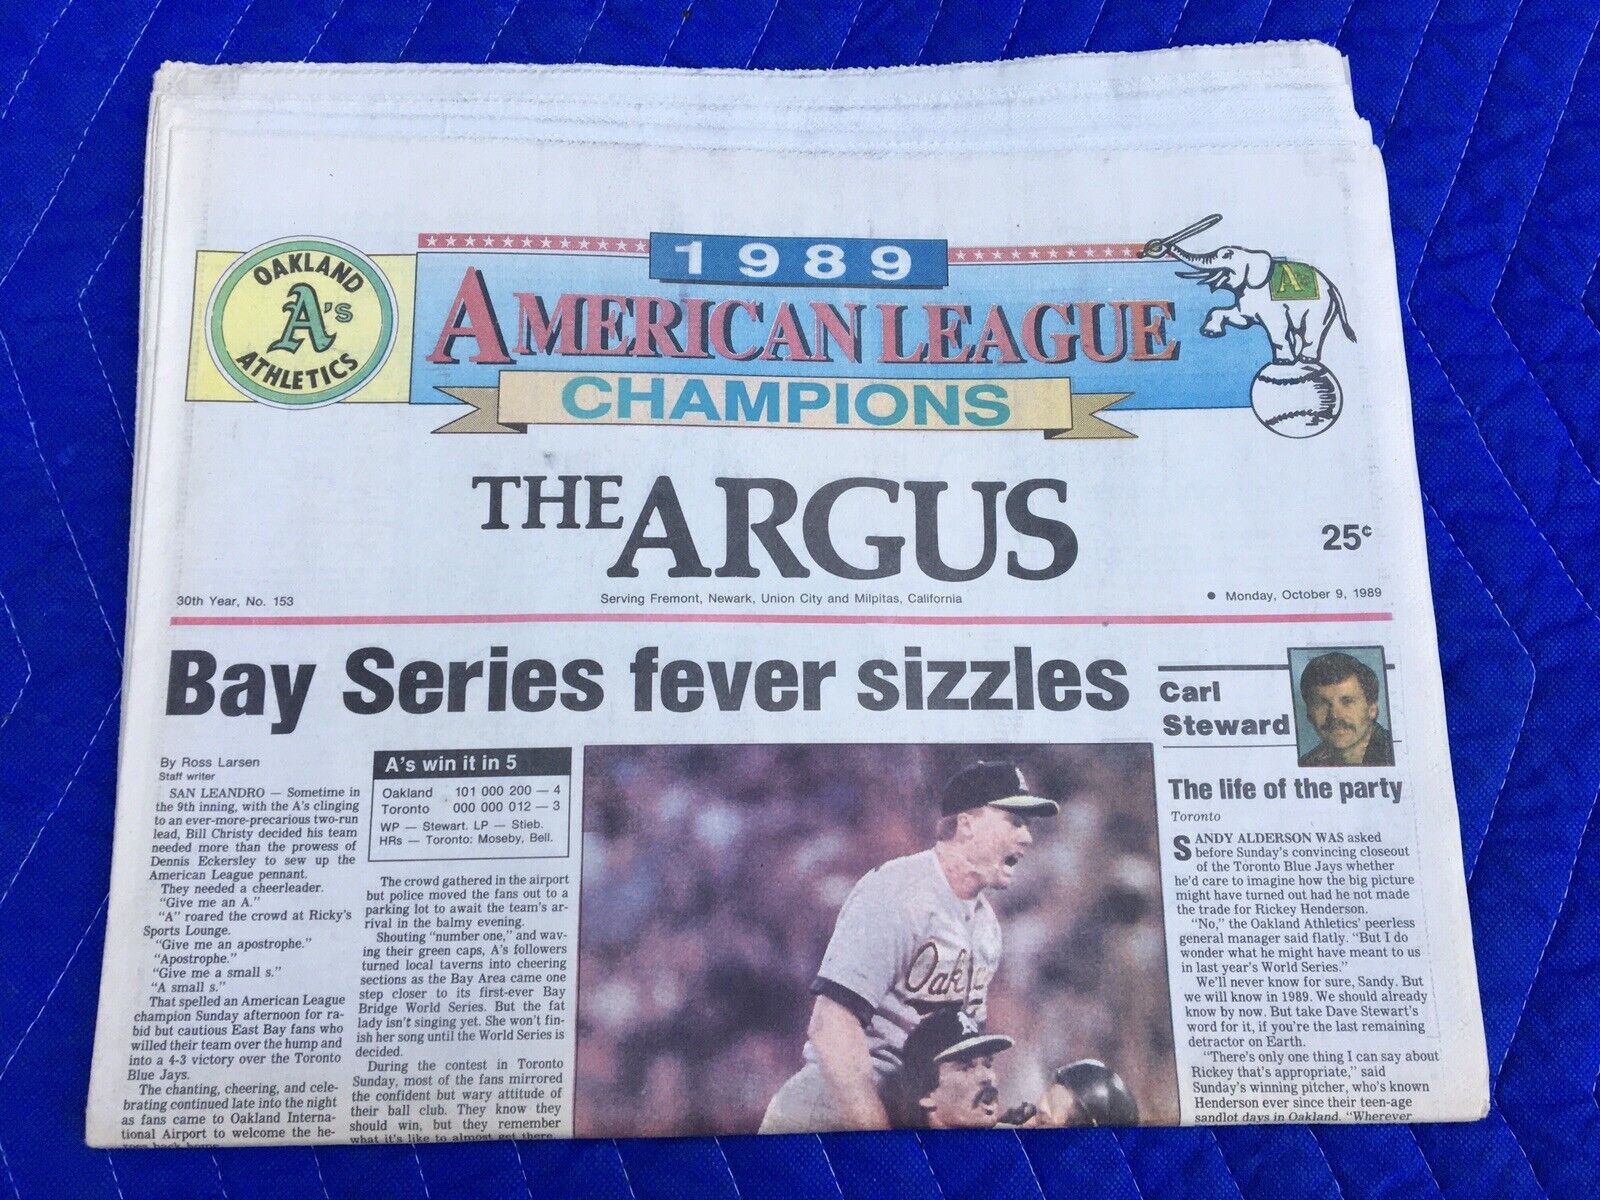 1989 A.L. CHAMPS A'S OAKLAND MARK McGWIRE COMPLETE NEWSPAPER OCTOBER 9 1989 